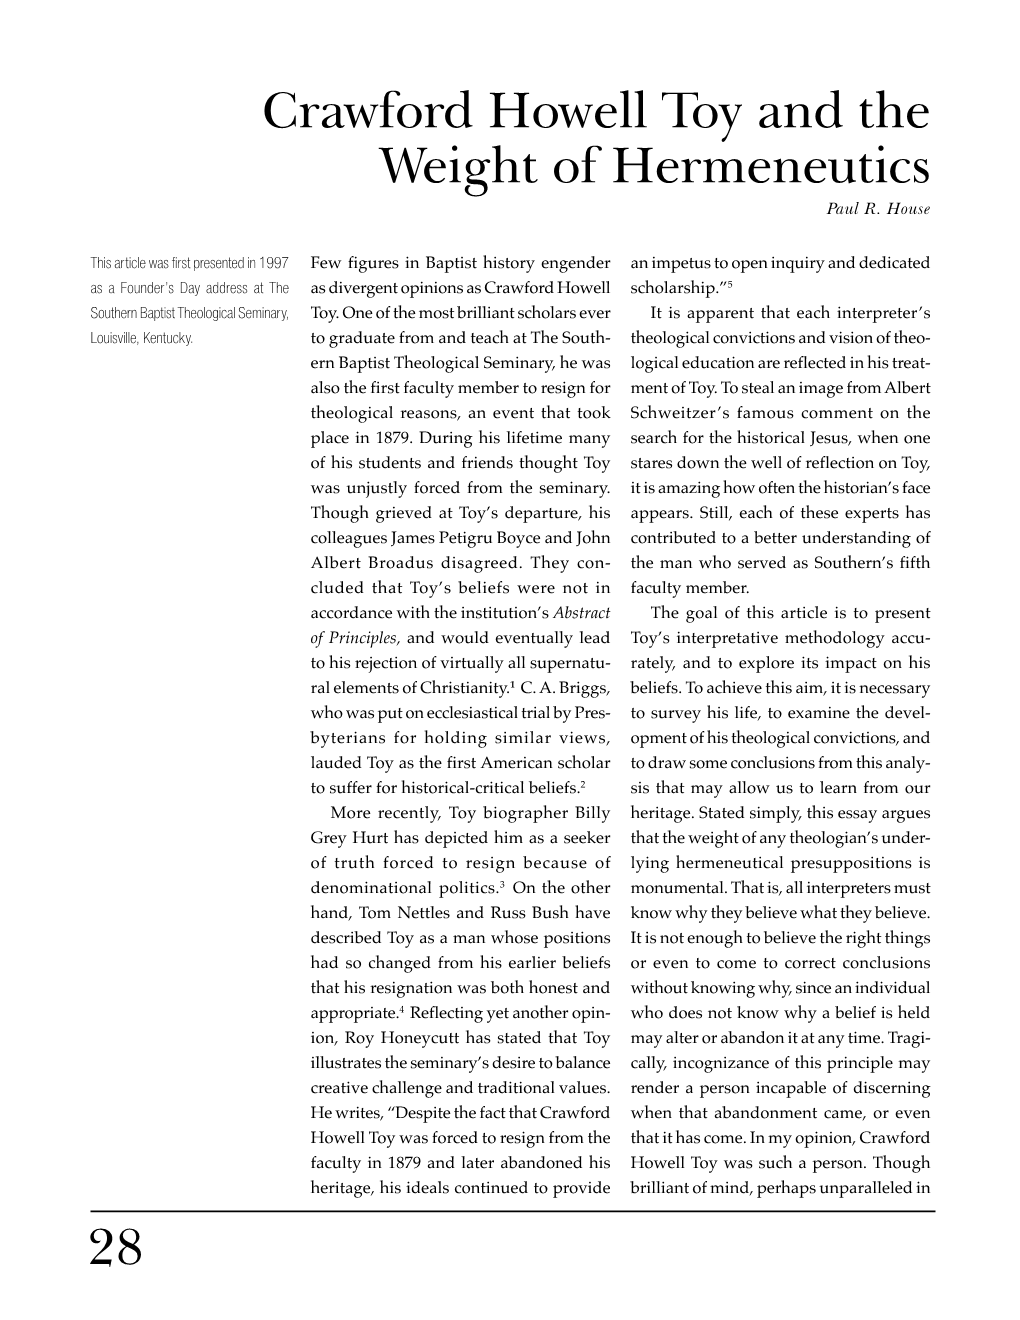 28 Crawford Howell Toy and the Weight of Hermeneutics